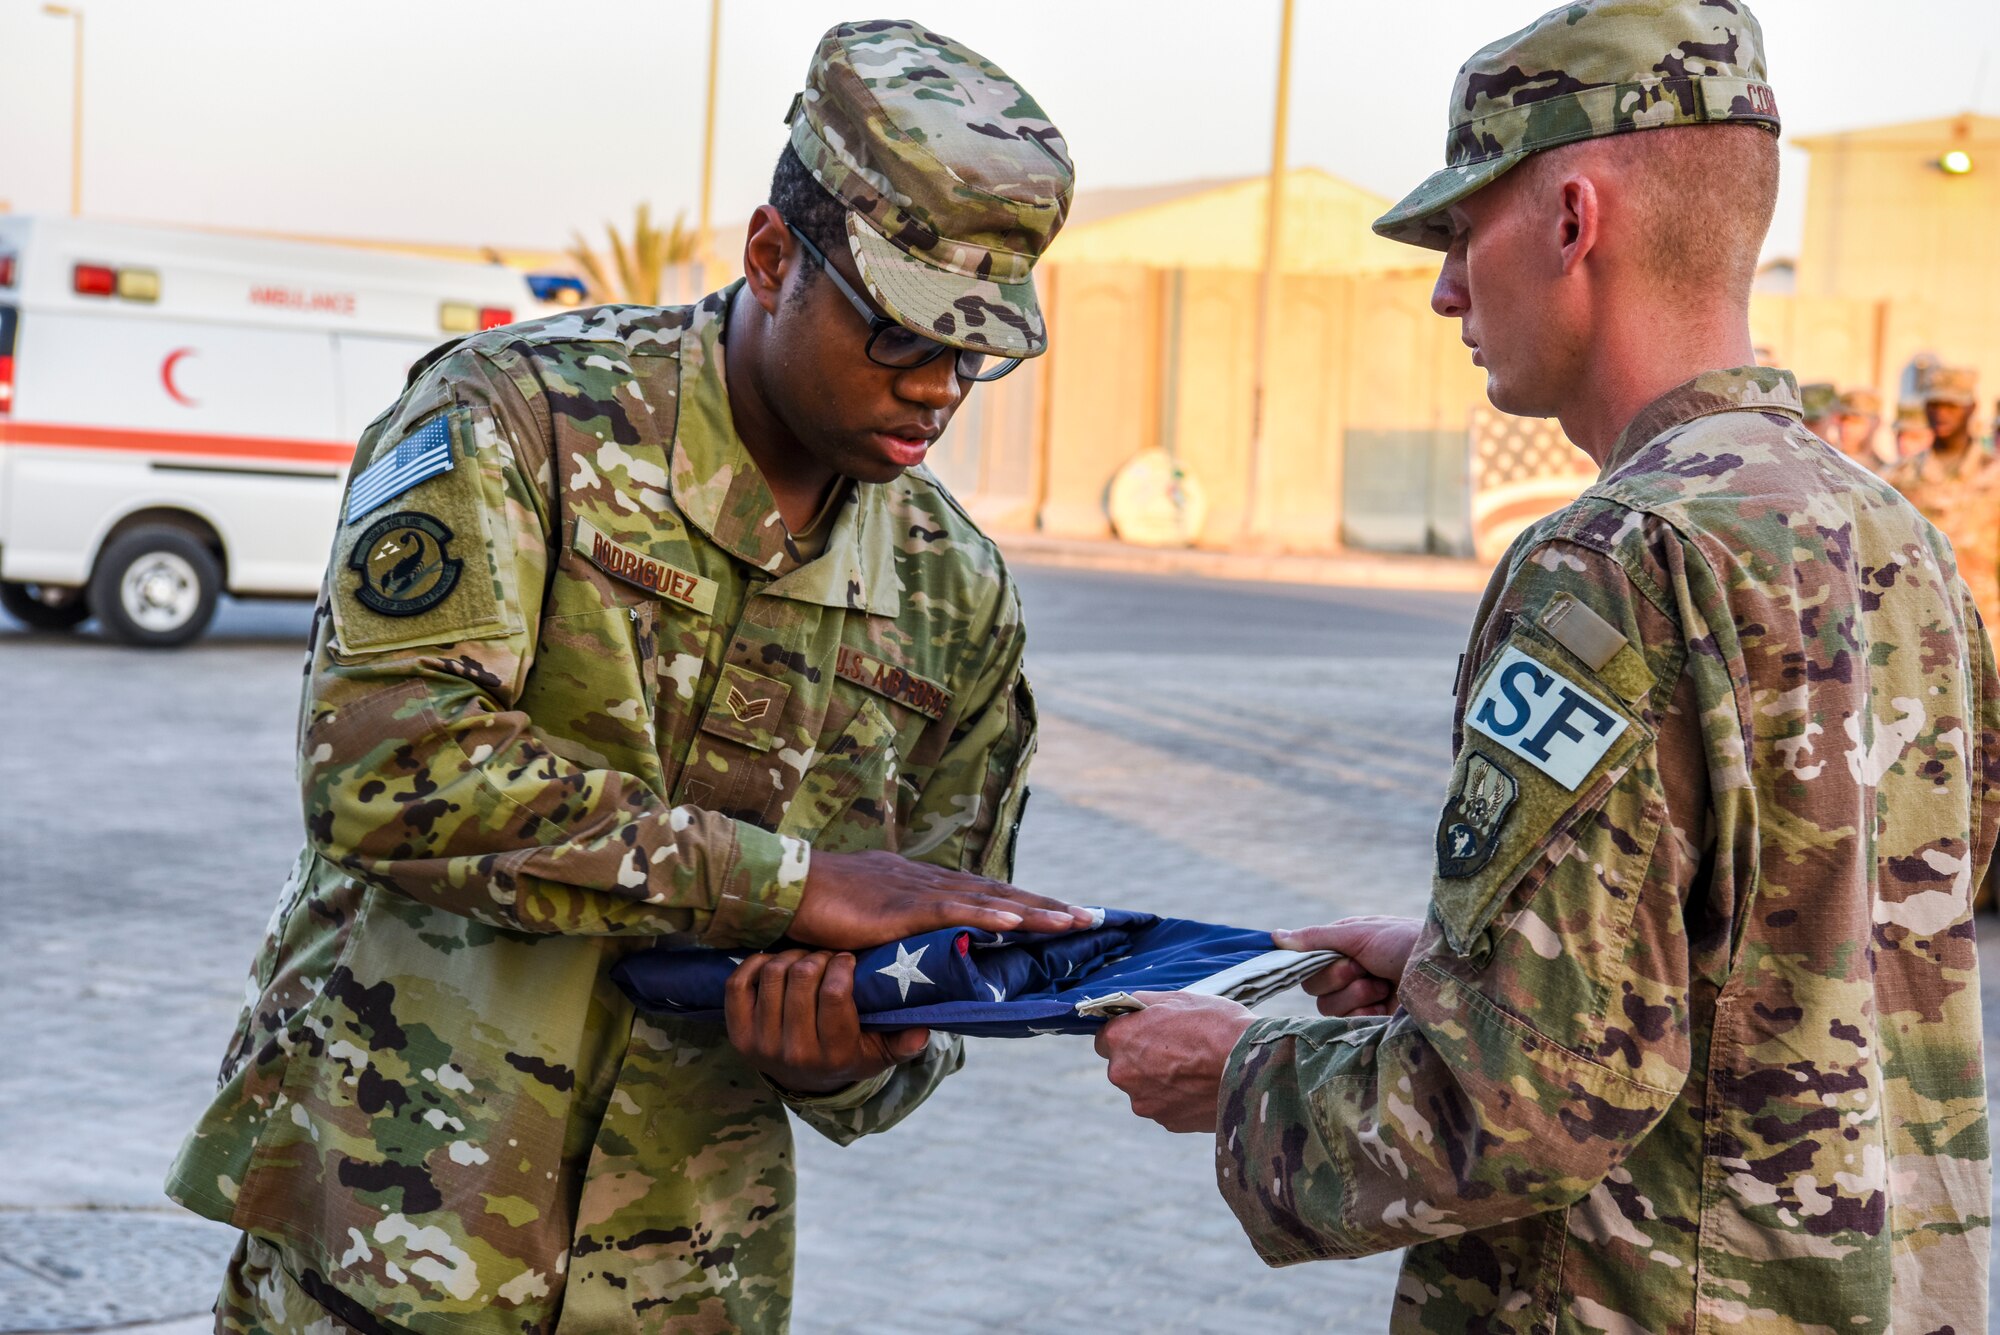 SrA William Rodriguez, 380th Expeditionary Security Forces Squadron, folds the flag held by SrA Johnathan Coble, 380th Expeditionary Security Forces Squadron, during a monthly retreat ceremony at Al Dhafra Air Base, United Arab Emirates, Dec. 7, 2018.